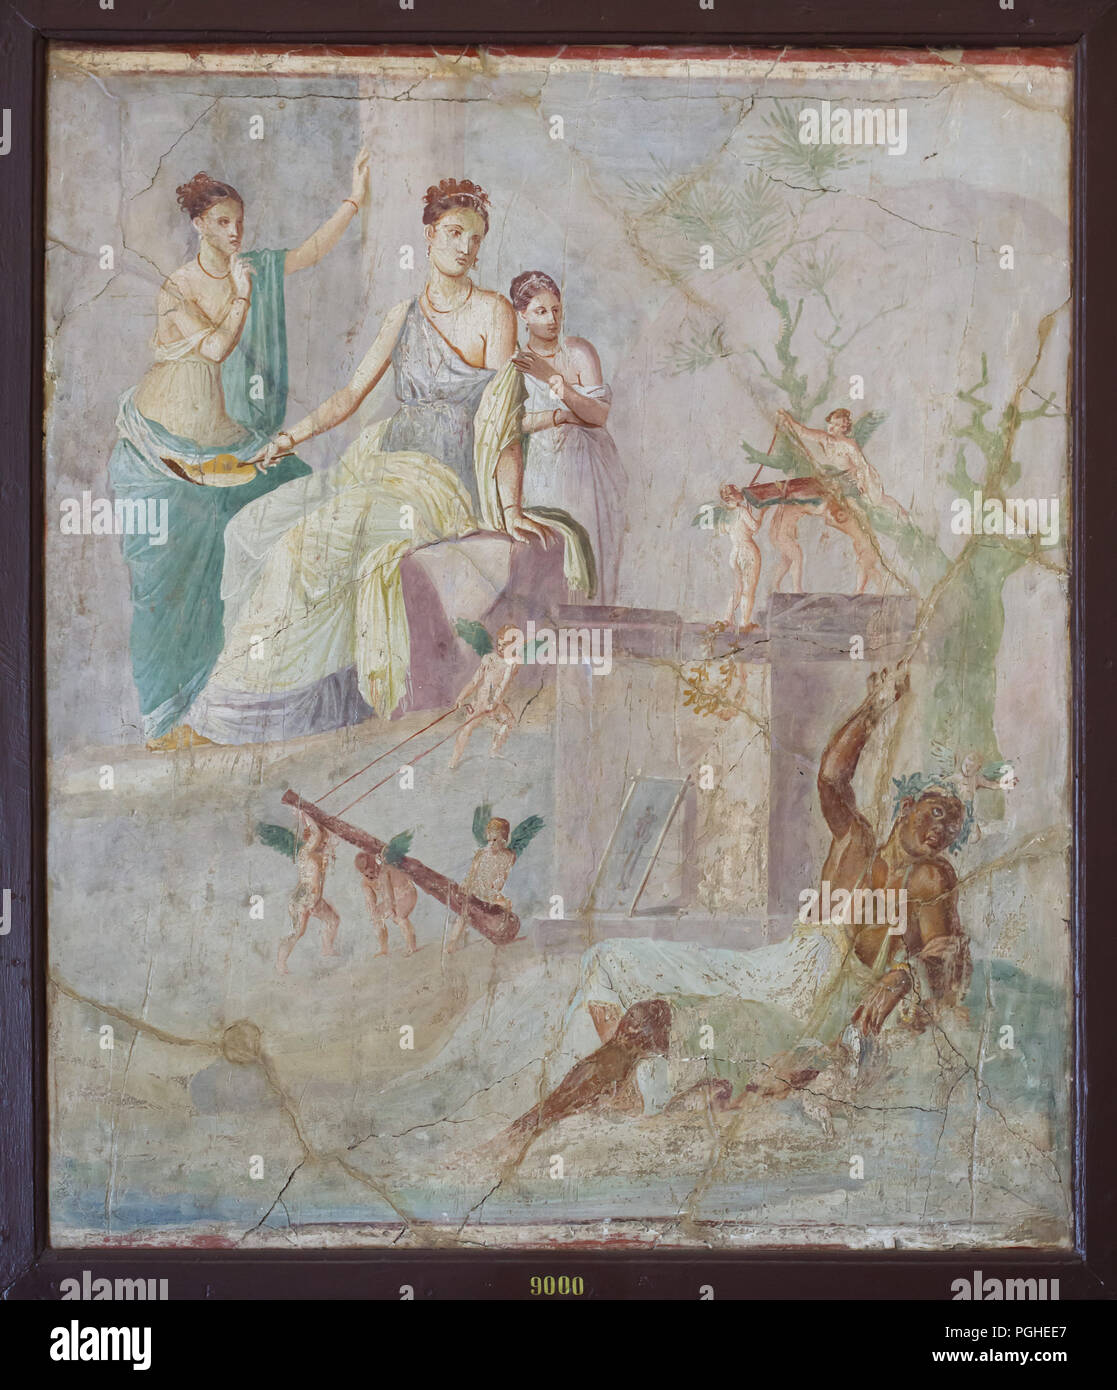 Hercules and Omphale depicted in the Roman fresco from the House of the Prince of Montenegro (Casa del Principe di Montenegro) in Pompeii (40-60 AD), now on display in the National Archaeological Museum (Museo Archeologico Nazionale di Napoli) in Naples, Campania, Italy. The Lydian Queen Omphale, depicted holding a leaf-fan, looks down at drunken Hercules with a bemused expression; her tunic slips off of her left shoulder in the manner of Venus. She is flanked by two young girls. Hercules wearing a woman's dress and a wreath on his head reclines drunkenly below. Cupids play with his club, whil Stock Photo